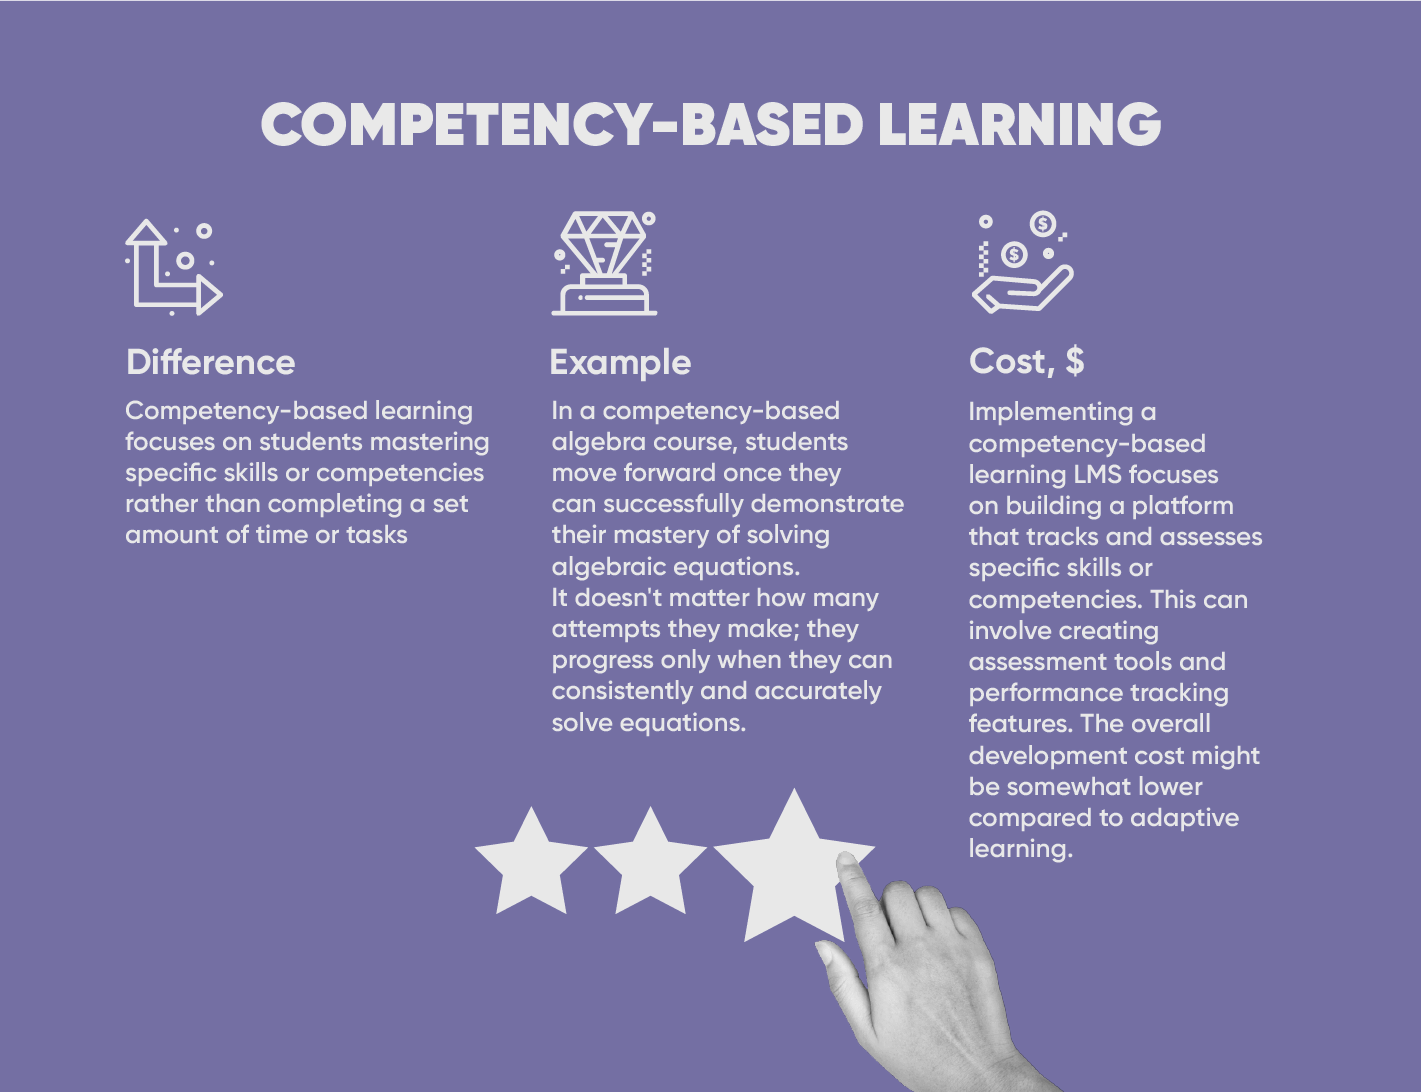 What competency-based Learning learning truly entails